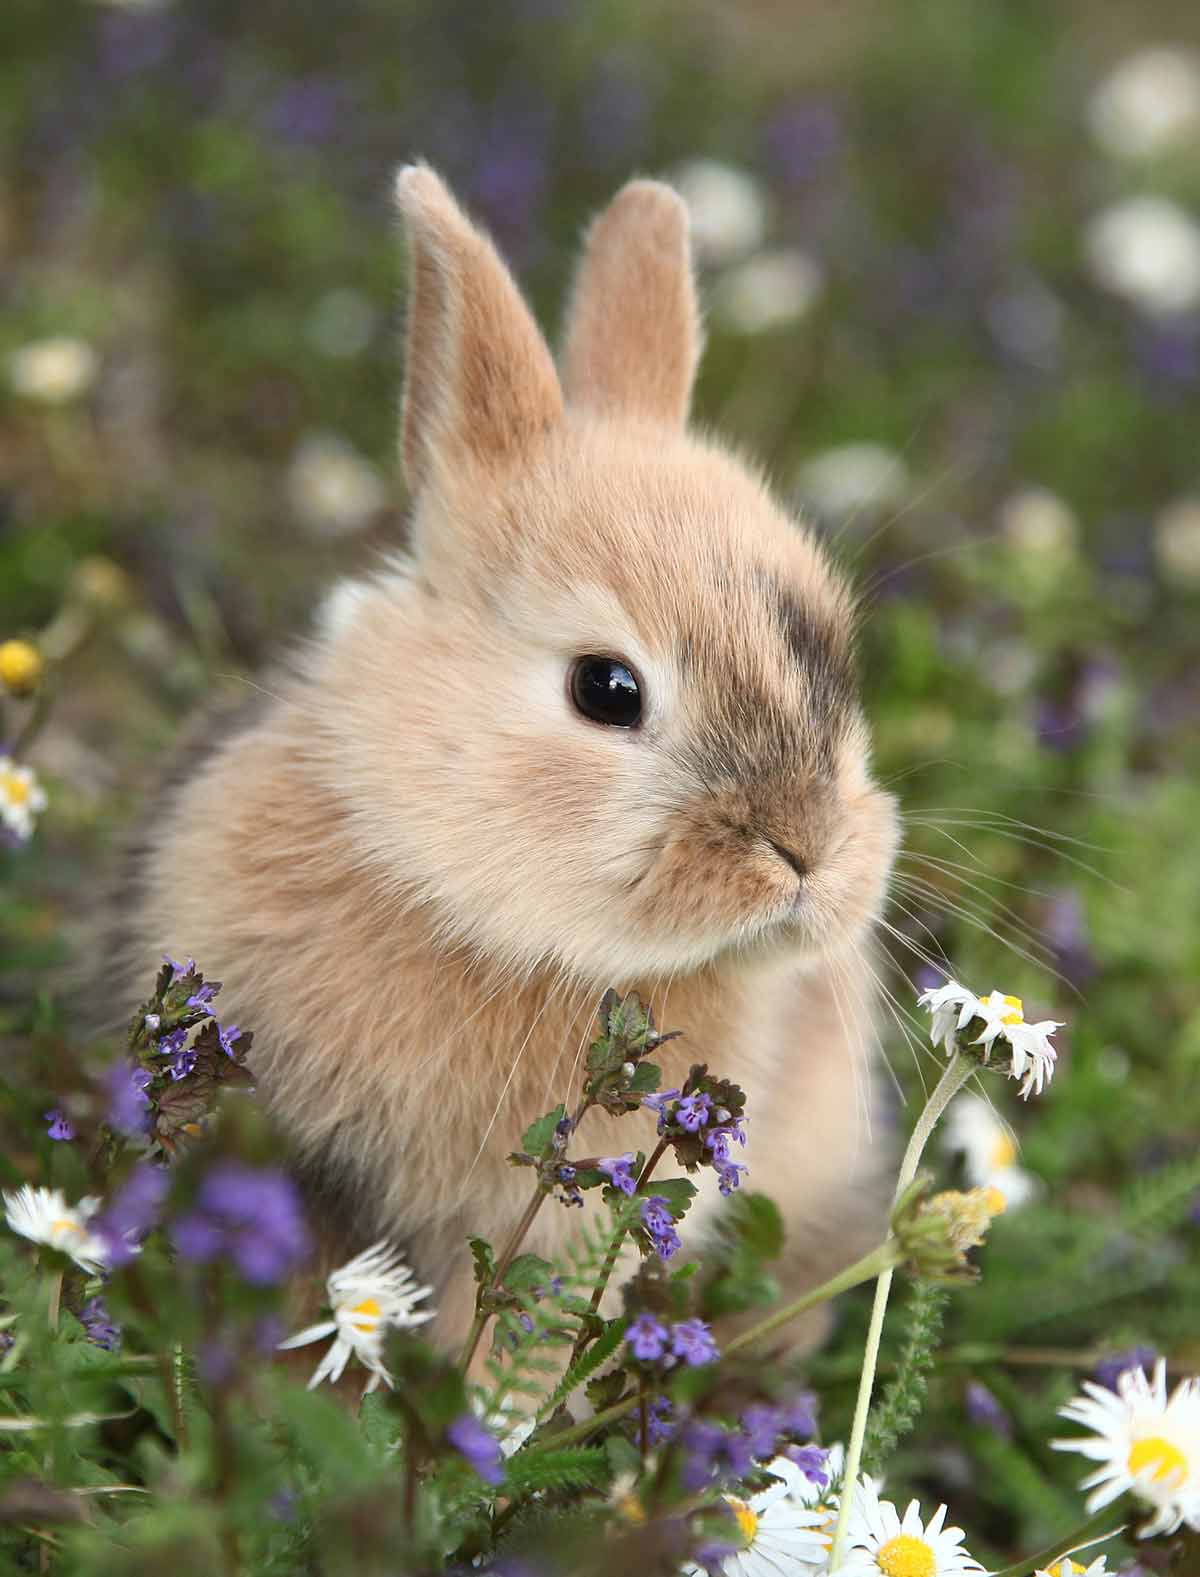 Do baby rabbits make different sounds than adults?